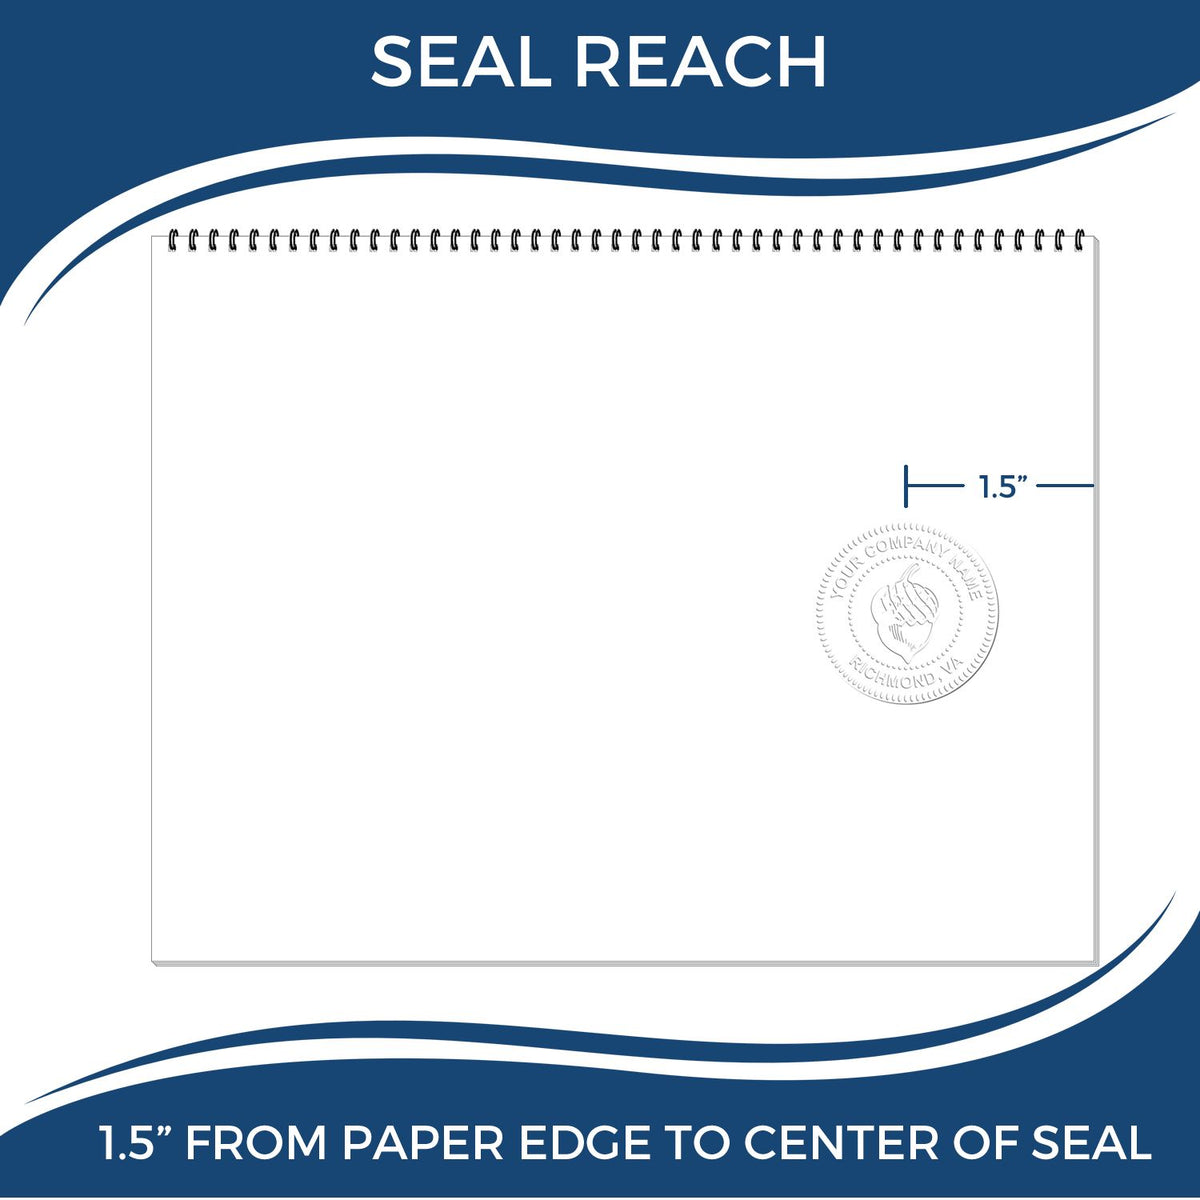 An infographic showing the seal reach which is represented by a ruler and a miniature seal image of the Delaware Desk Surveyor Seal Embosser